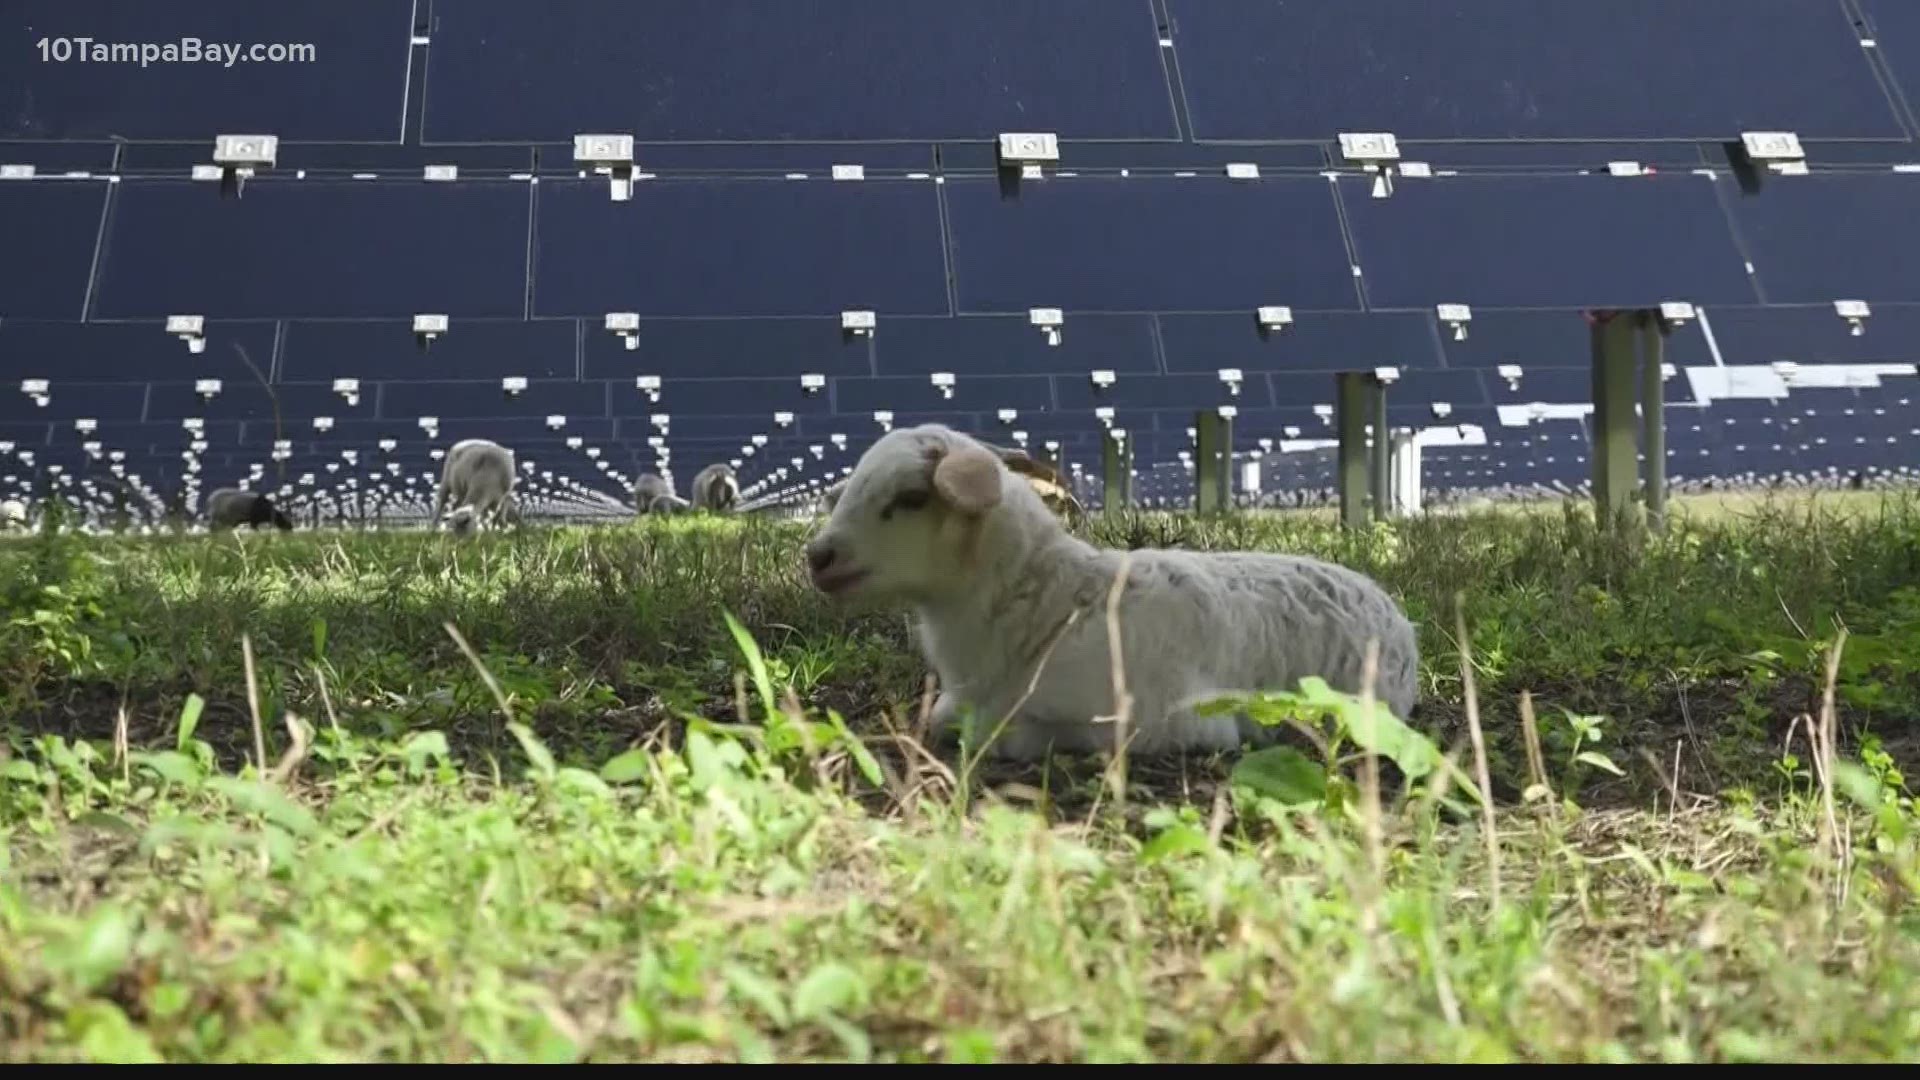 Tampa Electric’s Lamb Cam will stream video of newborn lambs from its Big Bend Solar site in Apollo Beach.